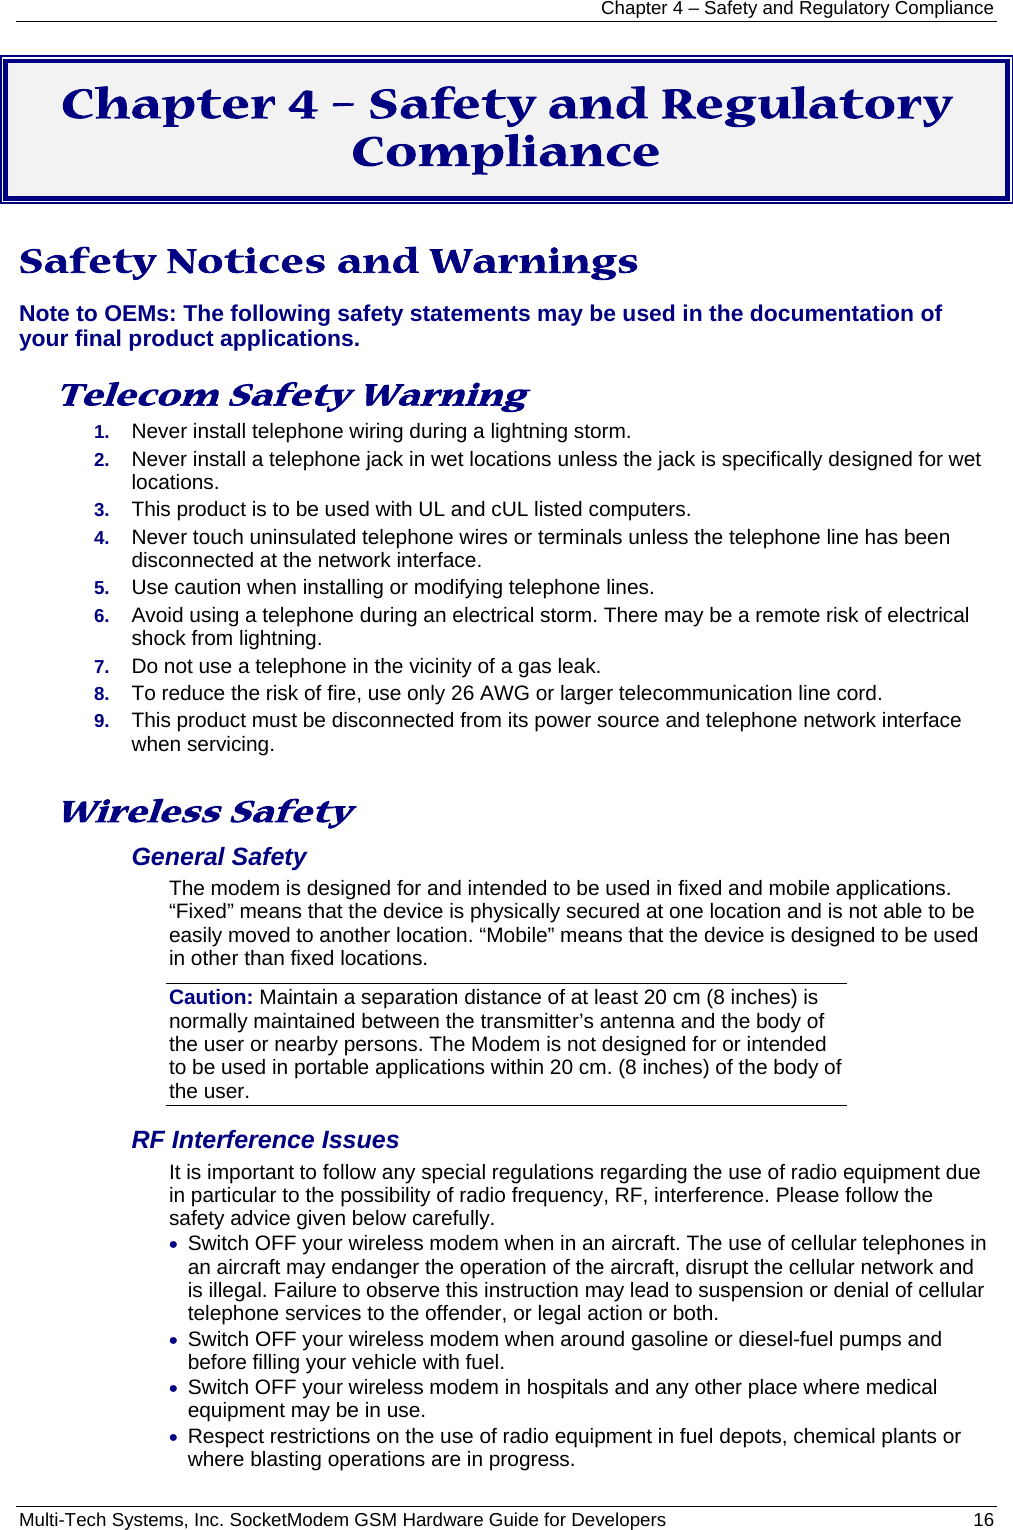 Chapter 4 – Safety and Regulatory Compliance Multi-Tech Systems, Inc. SocketModem GSM Hardware Guide for Developers   16  Chapter 4 – Safety and Regulatory Compliance  Safety Notices and Warnings Note to OEMs: The following safety statements may be used in the documentation of your final product applications.  Telecom Safety Warning  1.  Never install telephone wiring during a lightning storm. 2.  Never install a telephone jack in wet locations unless the jack is specifically designed for wet locations. 3.  This product is to be used with UL and cUL listed computers. 4.  Never touch uninsulated telephone wires or terminals unless the telephone line has been disconnected at the network interface. 5.  Use caution when installing or modifying telephone lines. 6.  Avoid using a telephone during an electrical storm. There may be a remote risk of electrical shock from lightning. 7.  Do not use a telephone in the vicinity of a gas leak. 8.  To reduce the risk of fire, use only 26 AWG or larger telecommunication line cord. 9.  This product must be disconnected from its power source and telephone network interface when servicing.  Wireless Safety  General Safety The modem is designed for and intended to be used in fixed and mobile applications. “Fixed” means that the device is physically secured at one location and is not able to be easily moved to another location. “Mobile” means that the device is designed to be used in other than fixed locations. Caution: Maintain a separation distance of at least 20 cm (8 inches) is normally maintained between the transmitter’s antenna and the body of the user or nearby persons. The Modem is not designed for or intended to be used in portable applications within 20 cm. (8 inches) of the body of the user. RF Interference Issues It is important to follow any special regulations regarding the use of radio equipment due in particular to the possibility of radio frequency, RF, interference. Please follow the safety advice given below carefully. • Switch OFF your wireless modem when in an aircraft. The use of cellular telephones in an aircraft may endanger the operation of the aircraft, disrupt the cellular network and is illegal. Failure to observe this instruction may lead to suspension or denial of cellular telephone services to the offender, or legal action or both. • Switch OFF your wireless modem when around gasoline or diesel-fuel pumps and before filling your vehicle with fuel. • Switch OFF your wireless modem in hospitals and any other place where medical equipment may be in use. • Respect restrictions on the use of radio equipment in fuel depots, chemical plants or where blasting operations are in progress. 